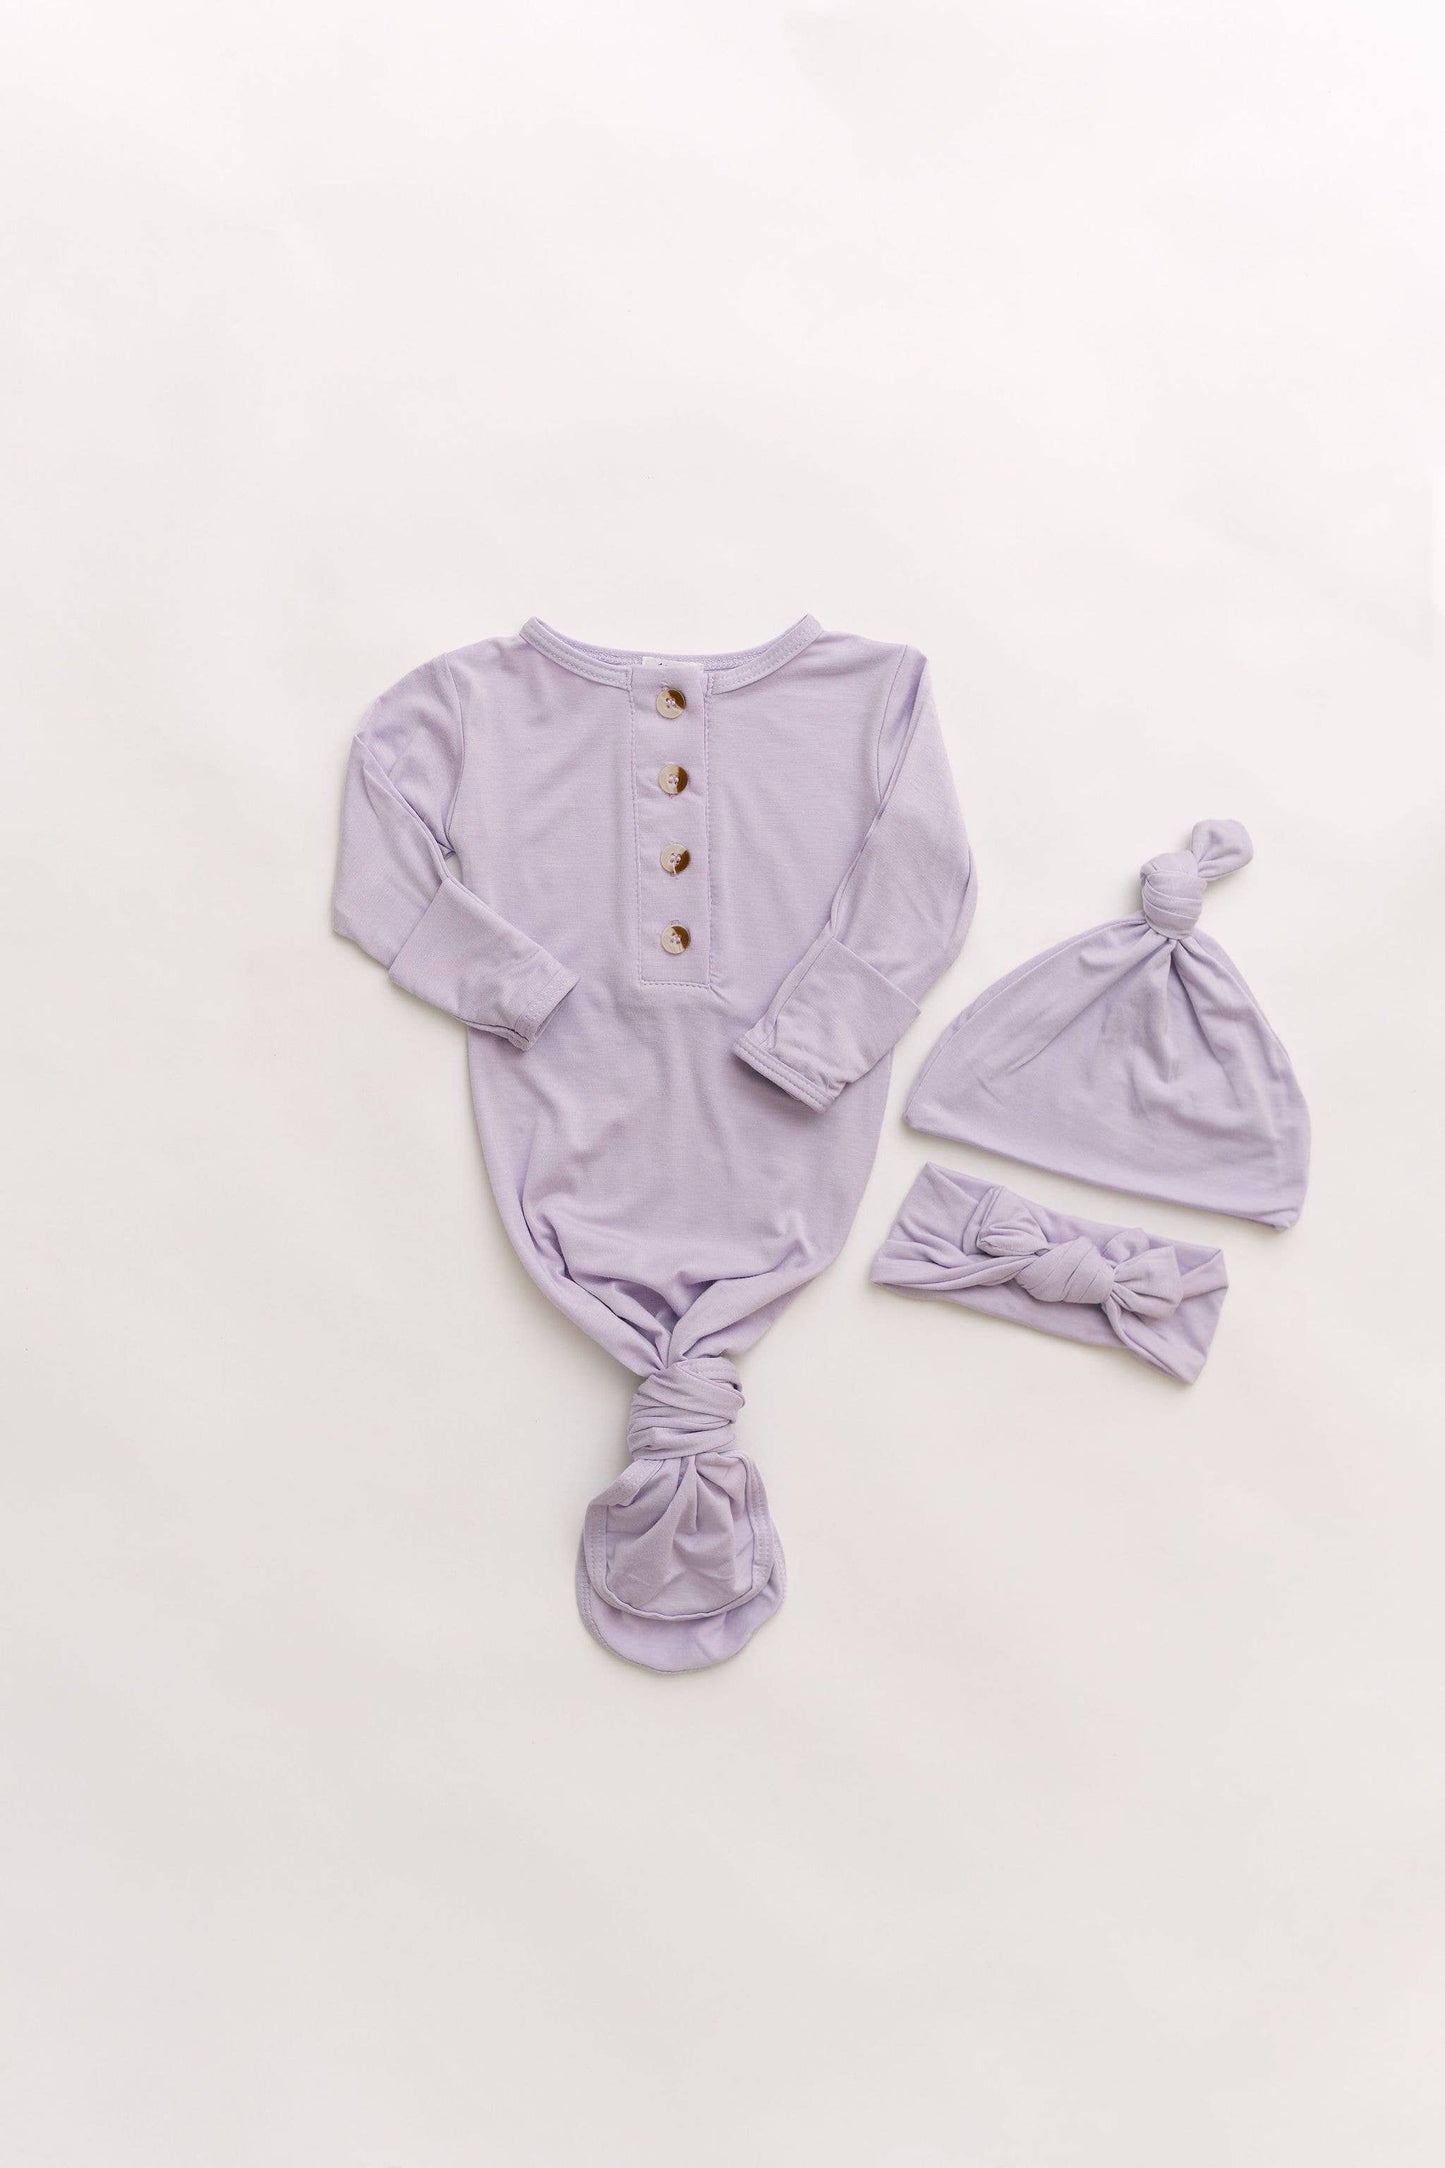 Knotted Baby Gown, Hat & Headband Set- Lavender